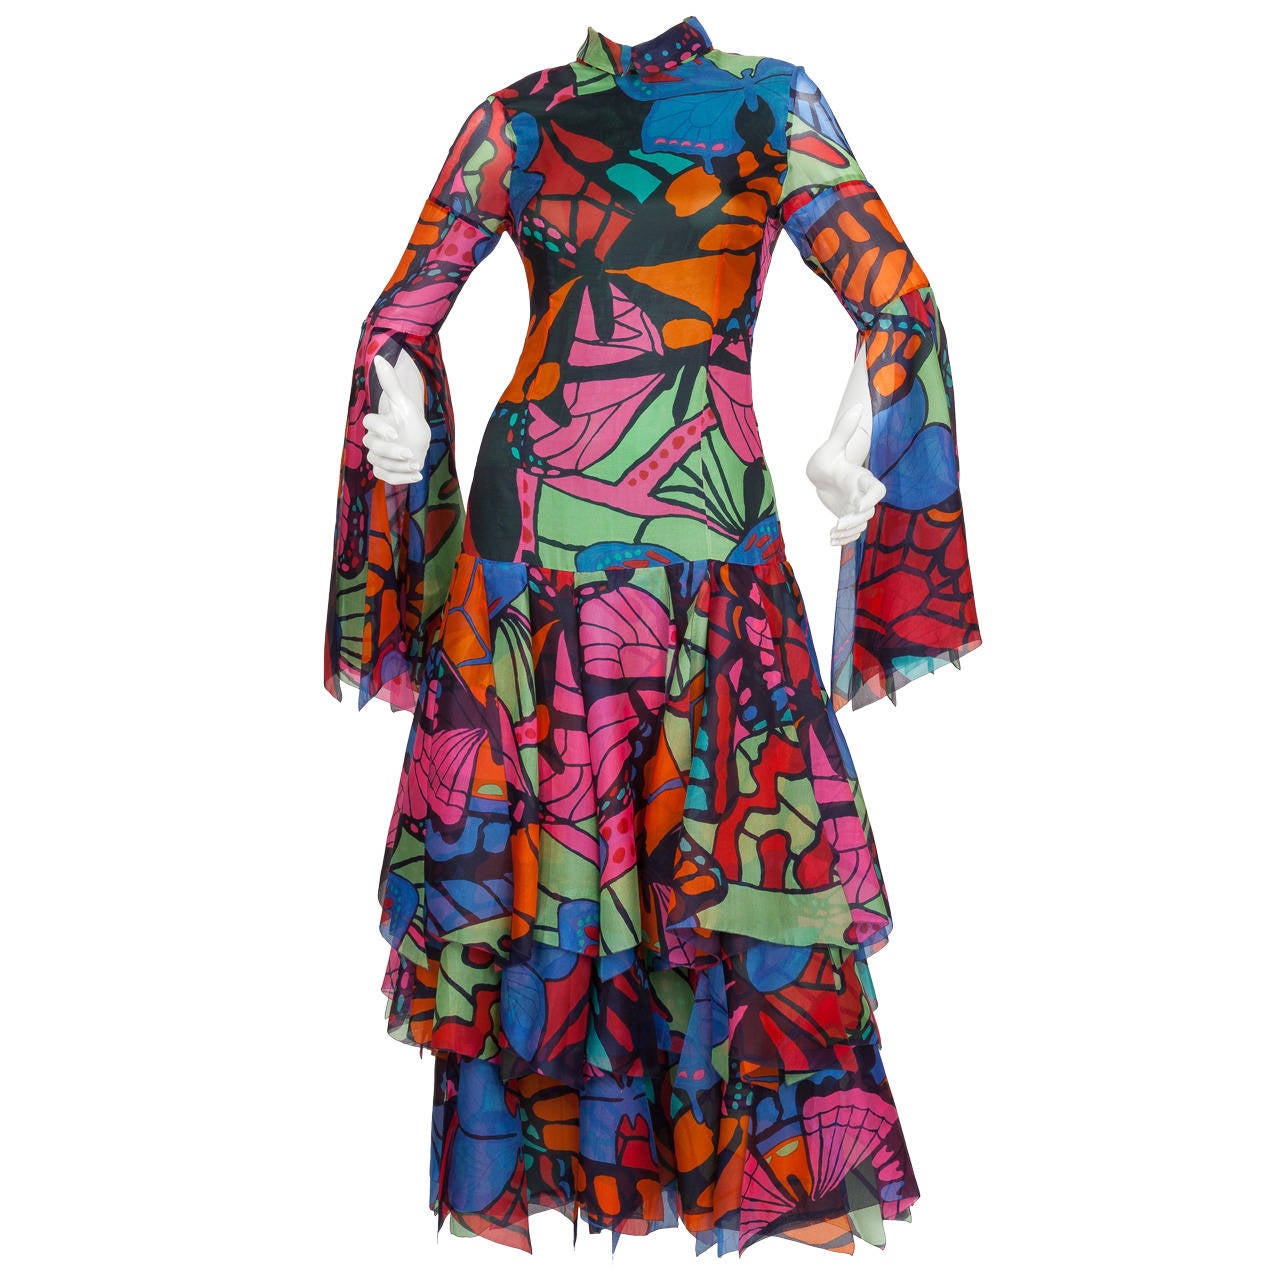 Pierre Cardin Demi-Couture Evening Gown with Butterfly Print ca. 1970-1971